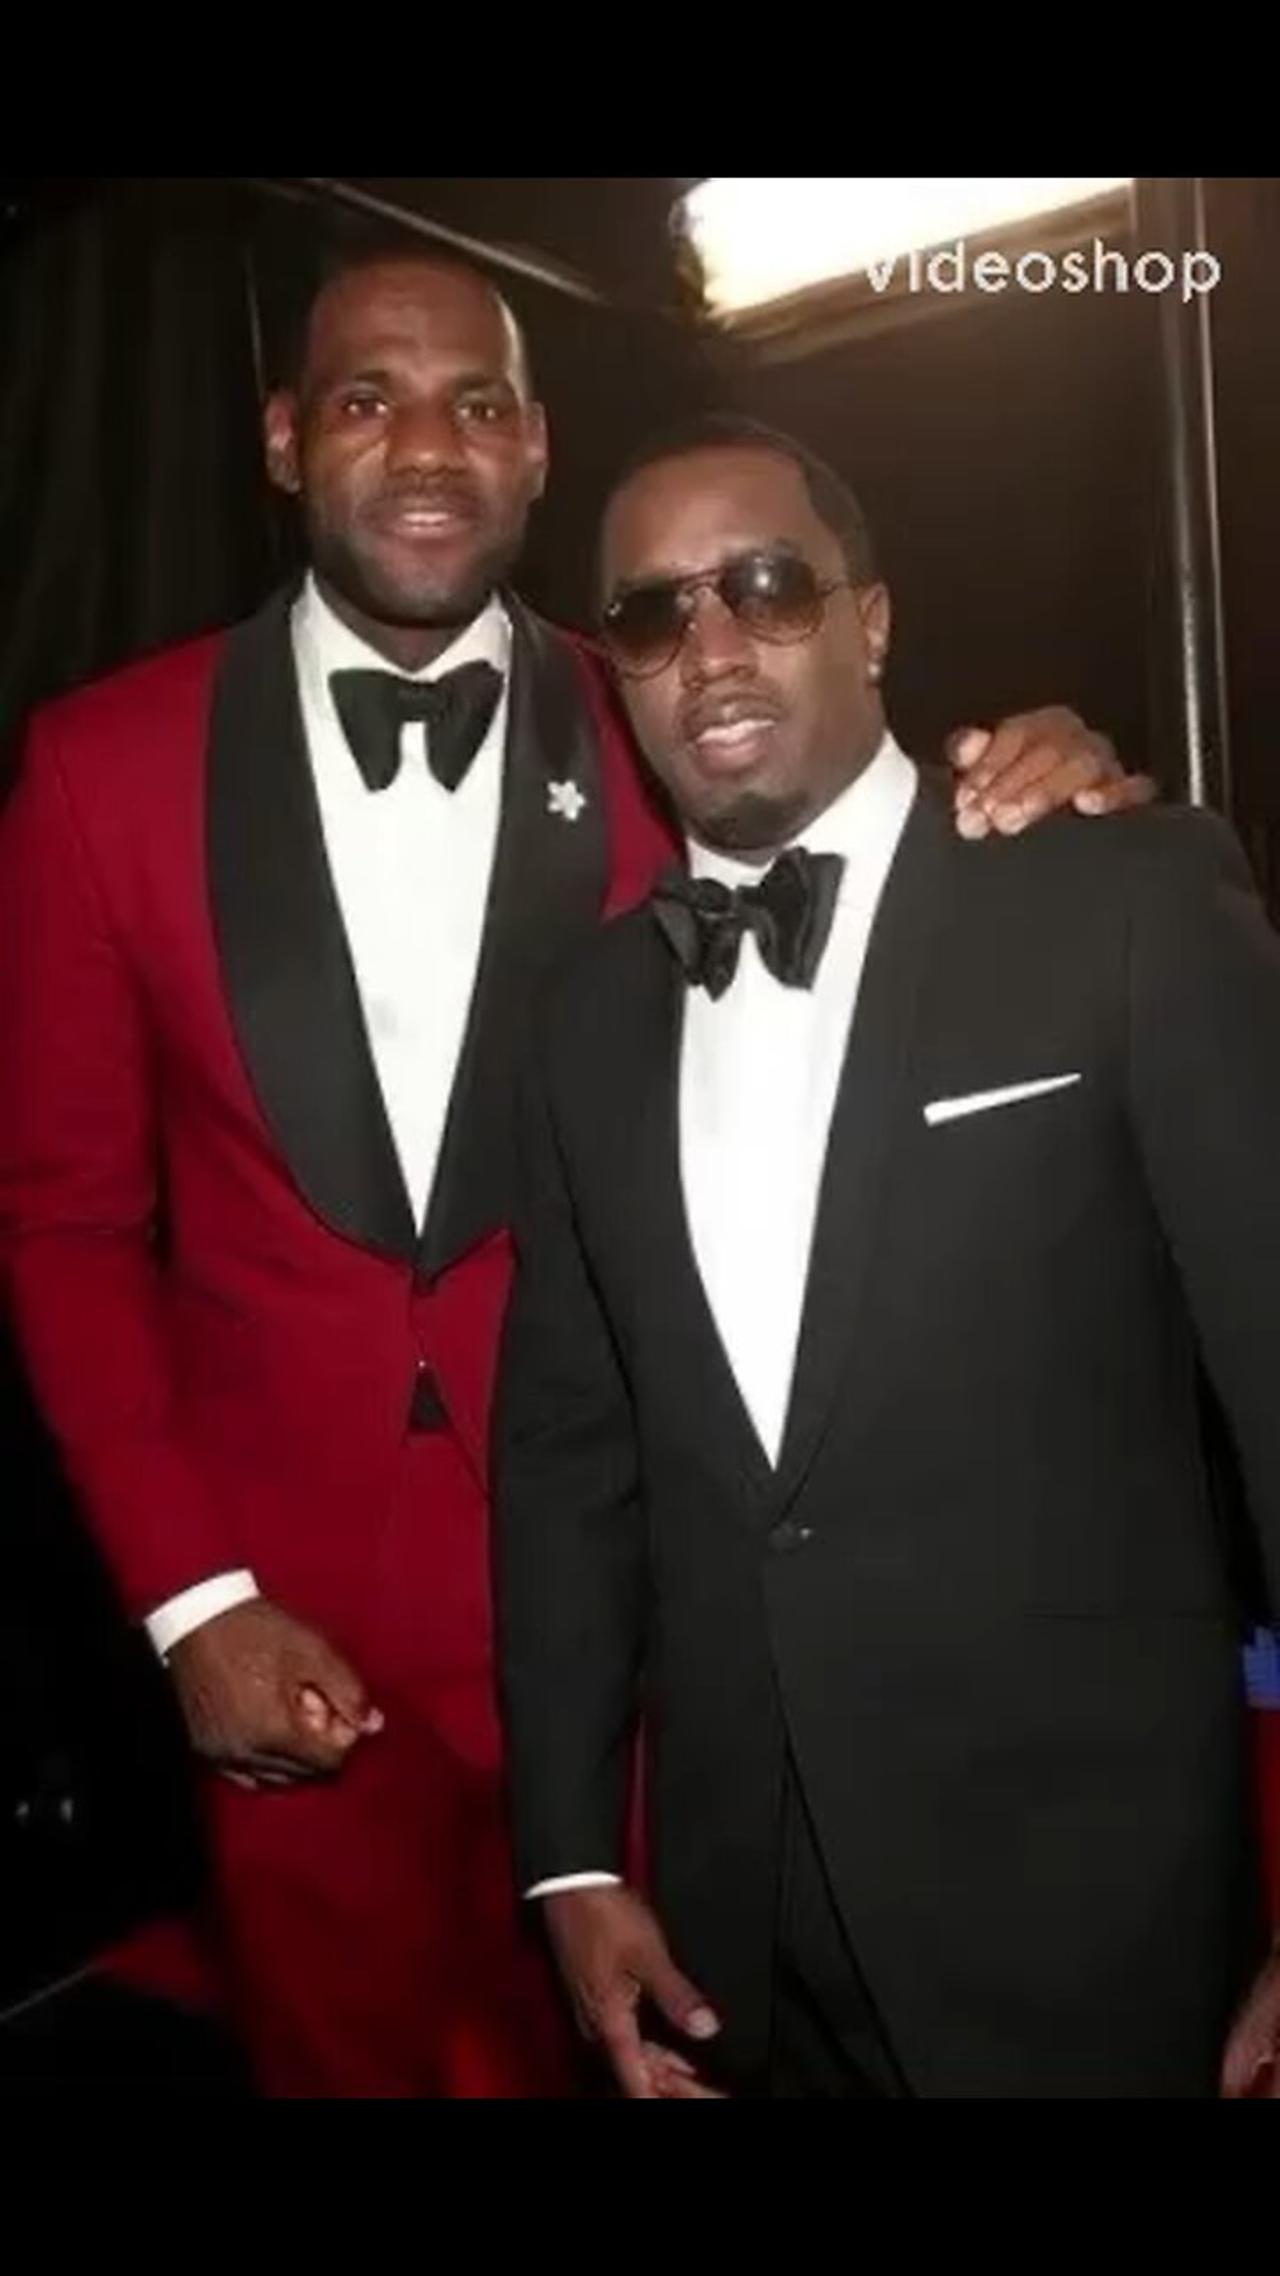 Did lebron join diddy in his freak off sessions?